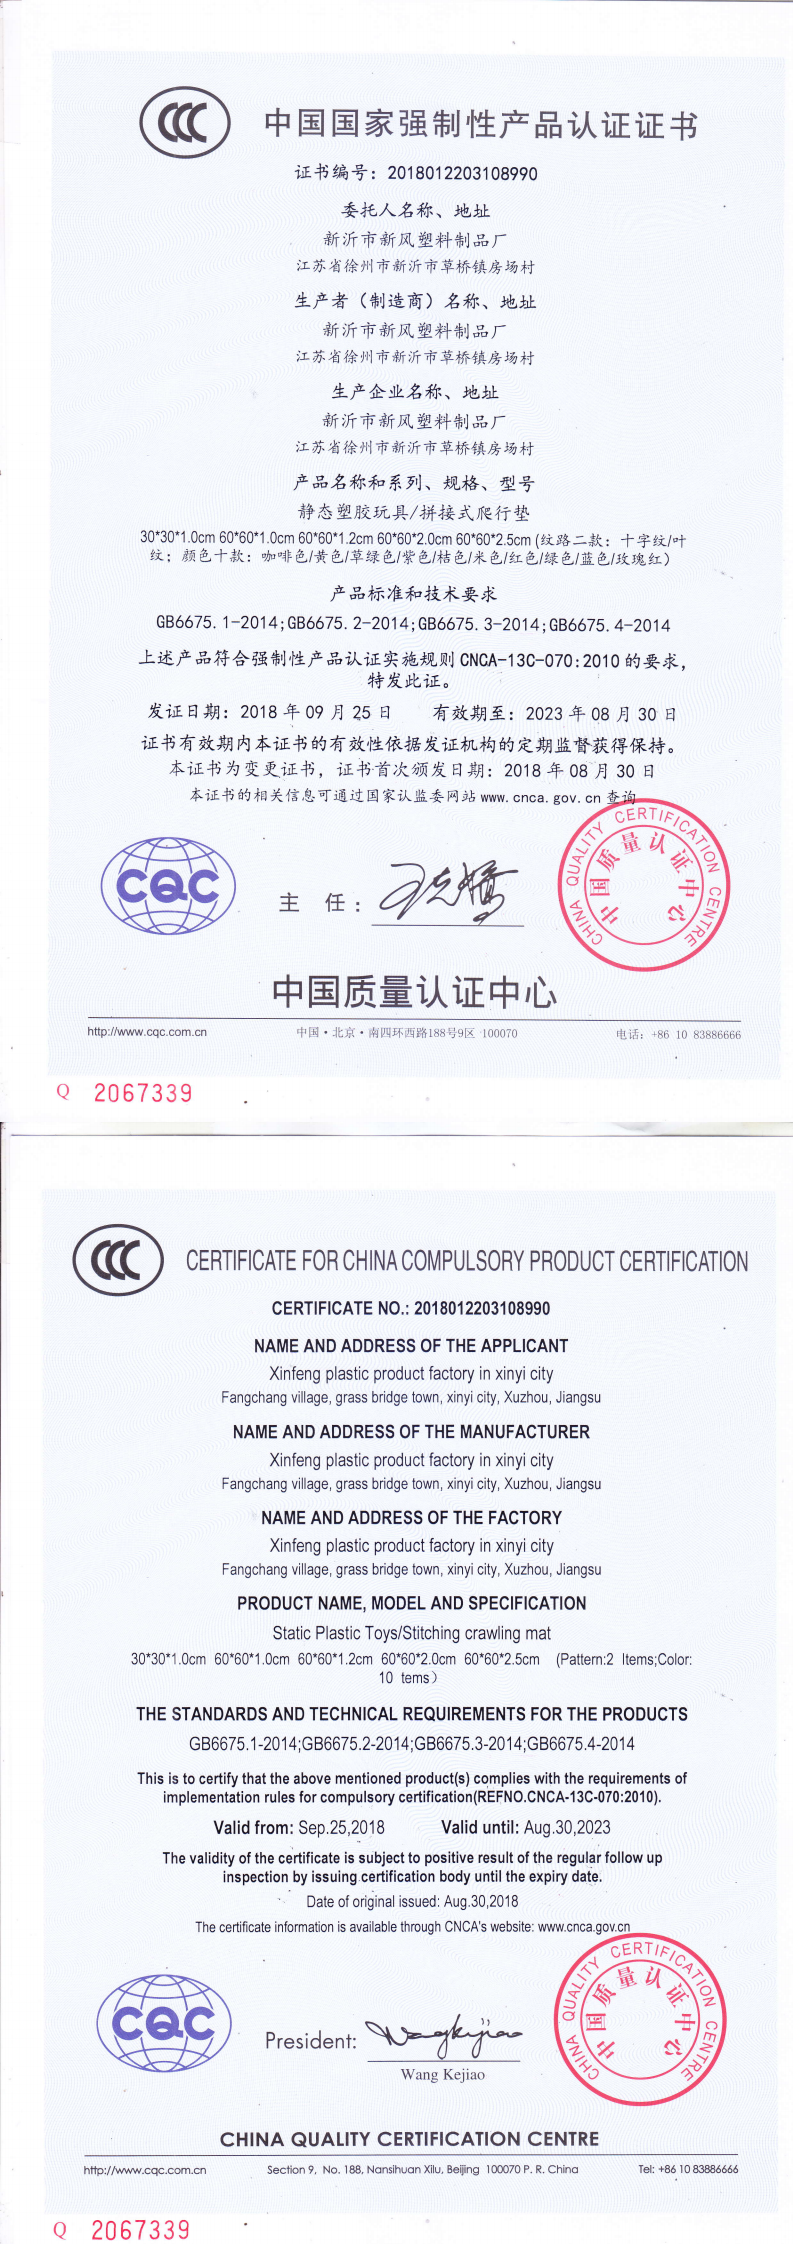 CERTIFICATE FOR CHINA COMPULSORY PRODUCT CERTIFICATION 0 Professional